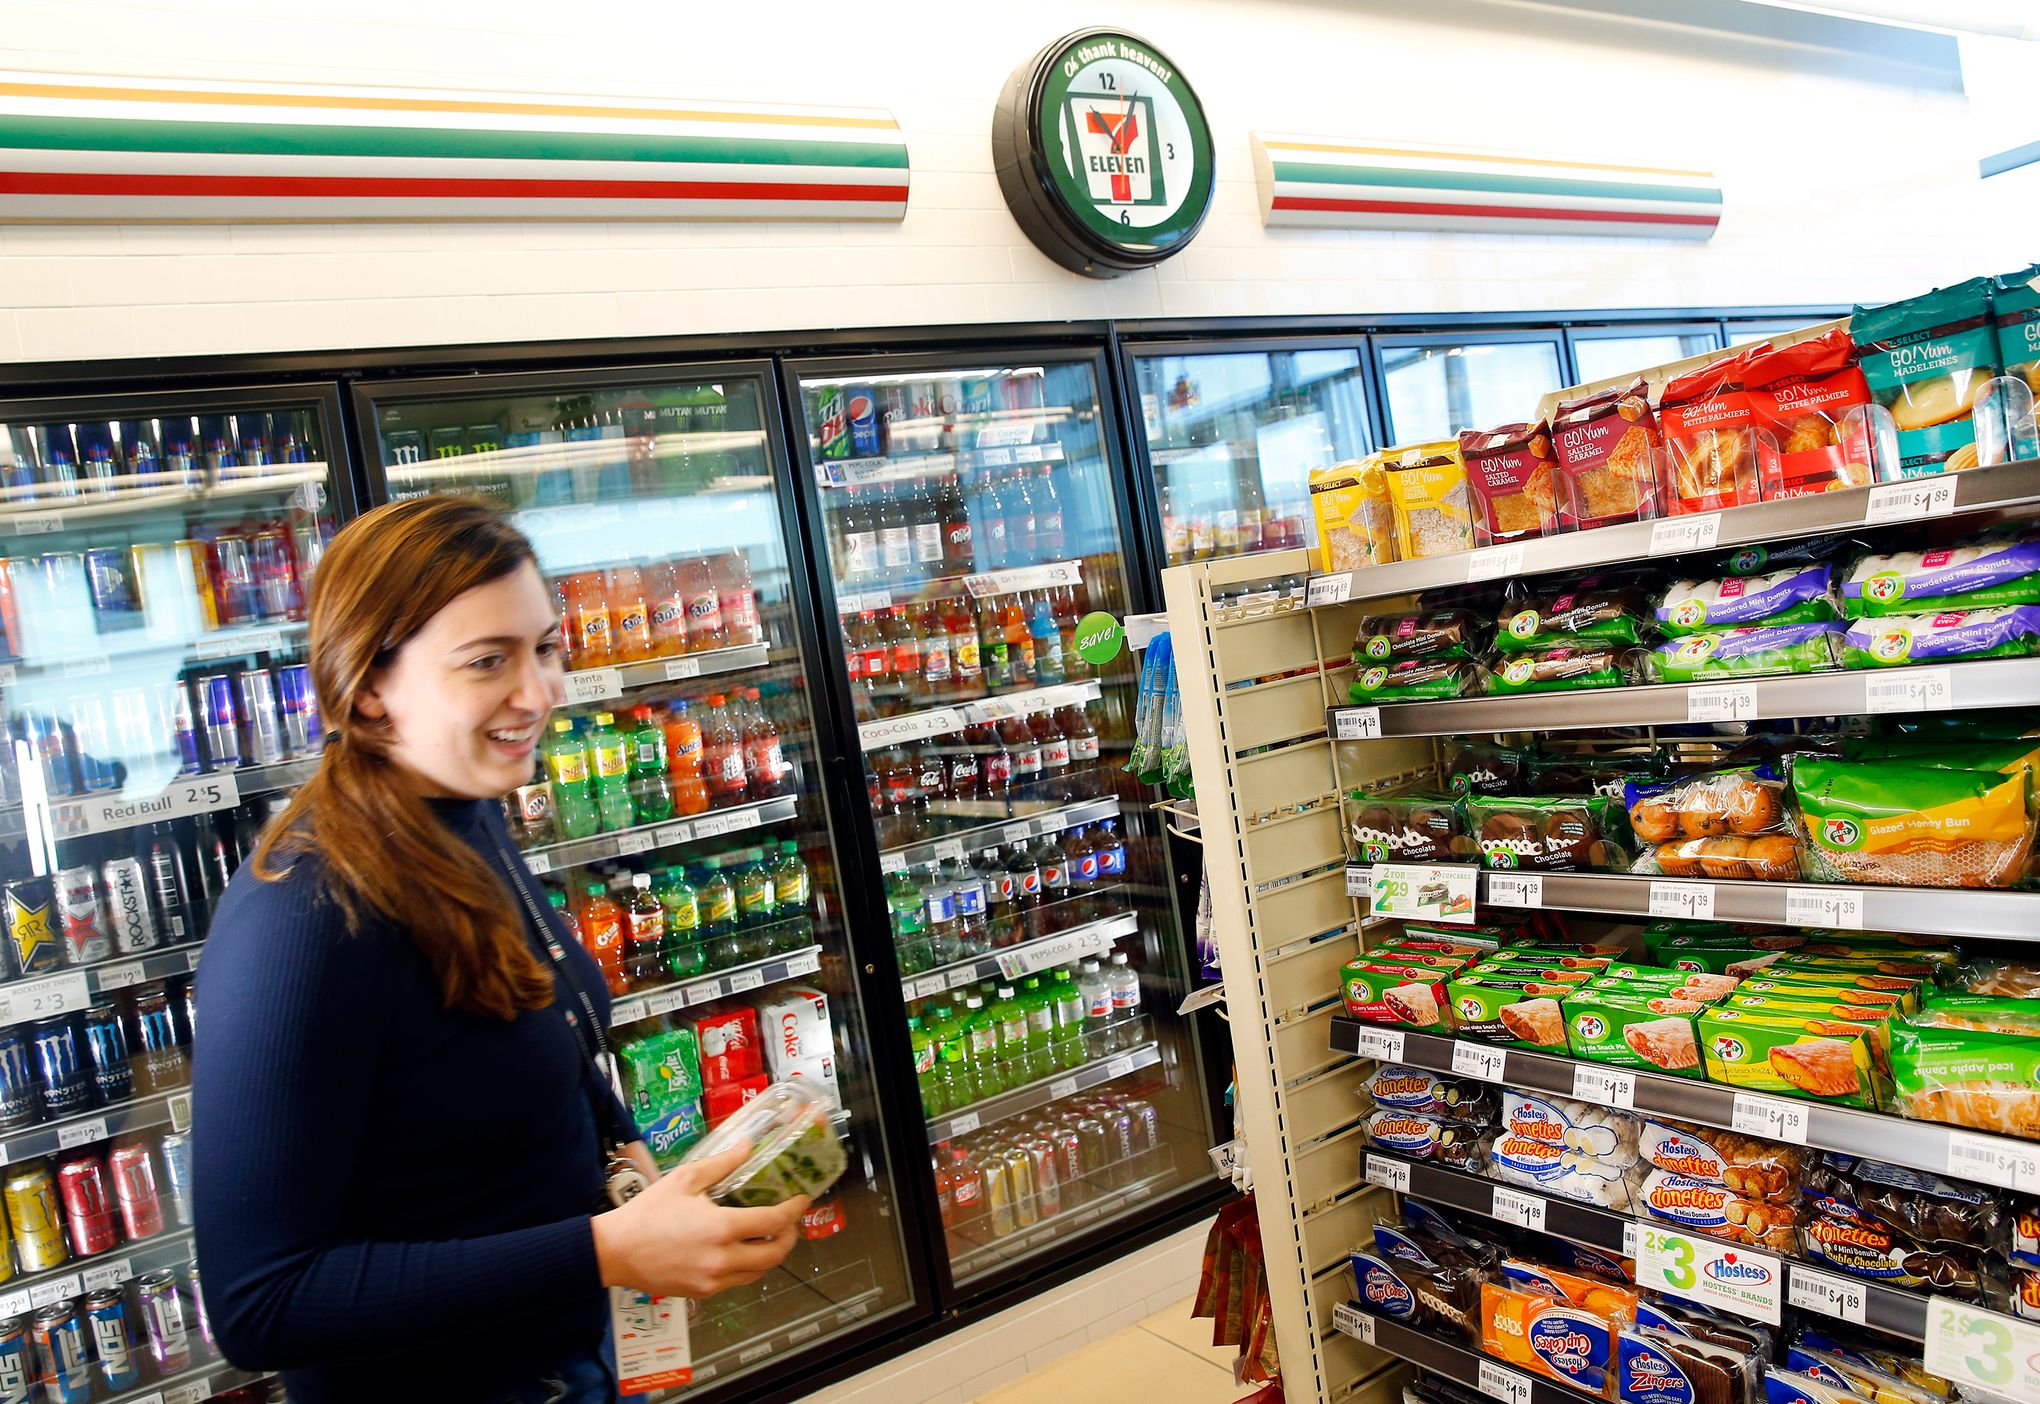 Are convenience stores still convenient? 7-Eleven competes to stay